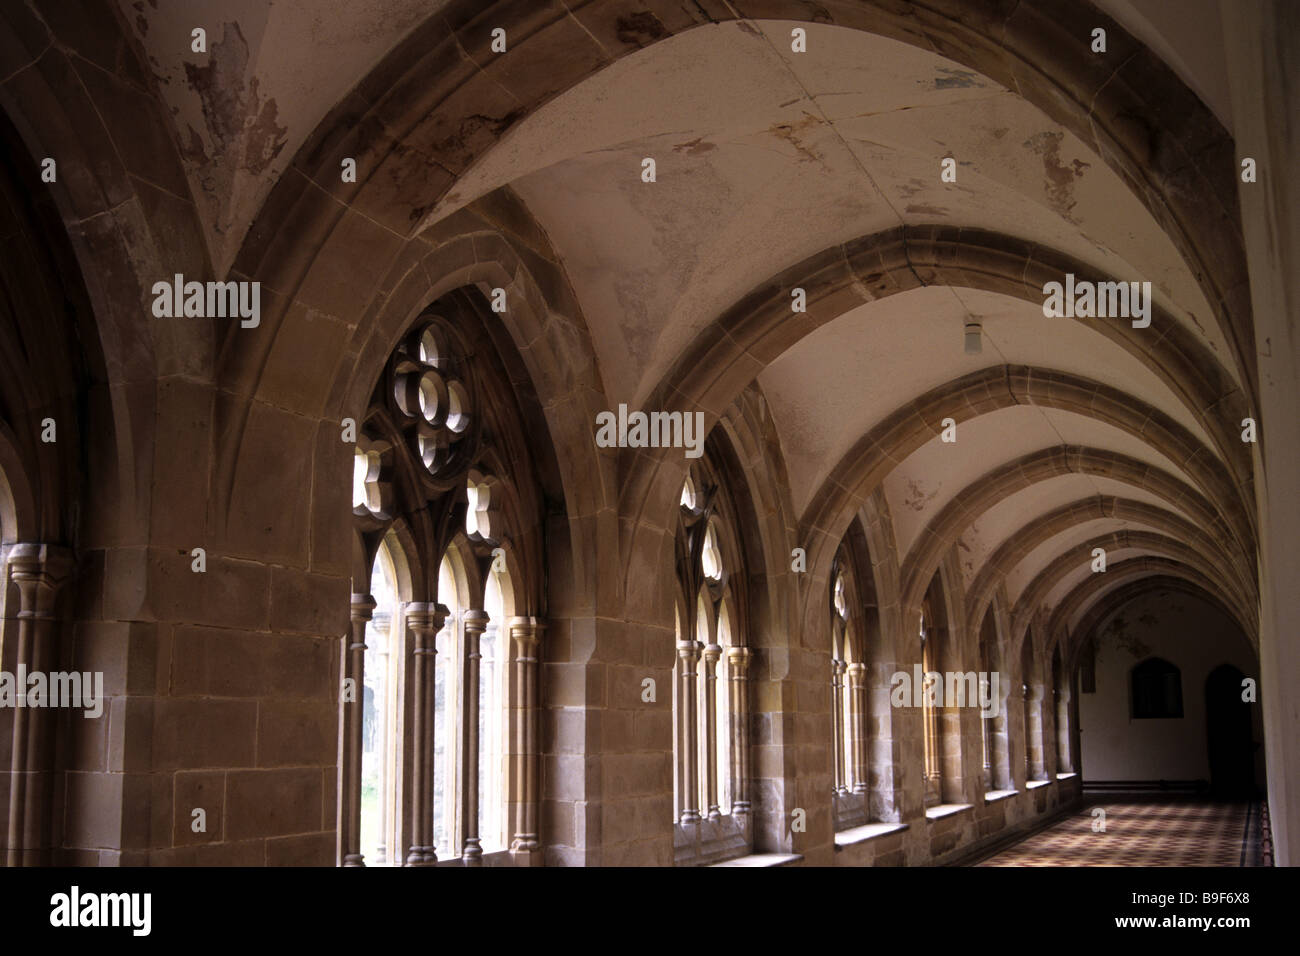 Cathedral cloister. Stock Photo